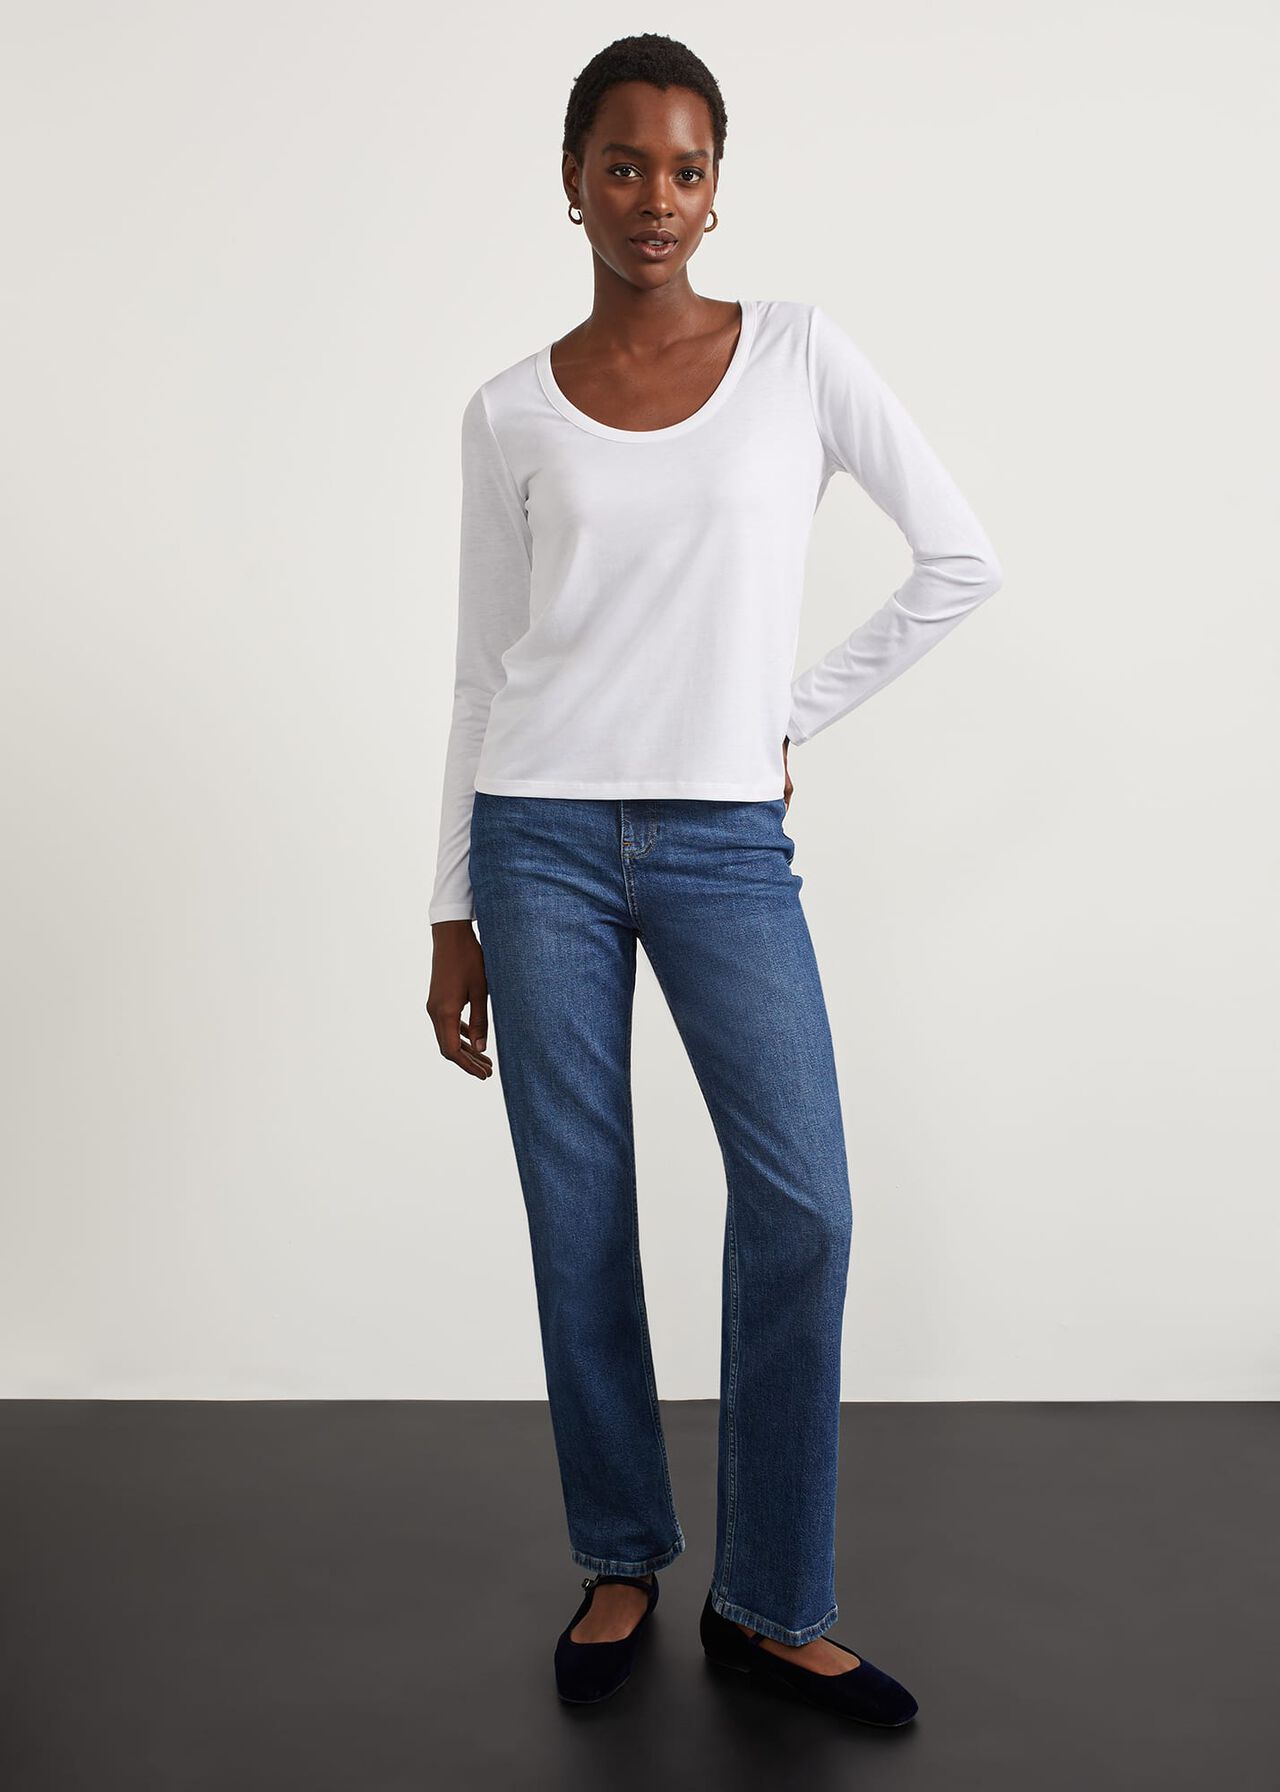 Foster Top, White, hi-res